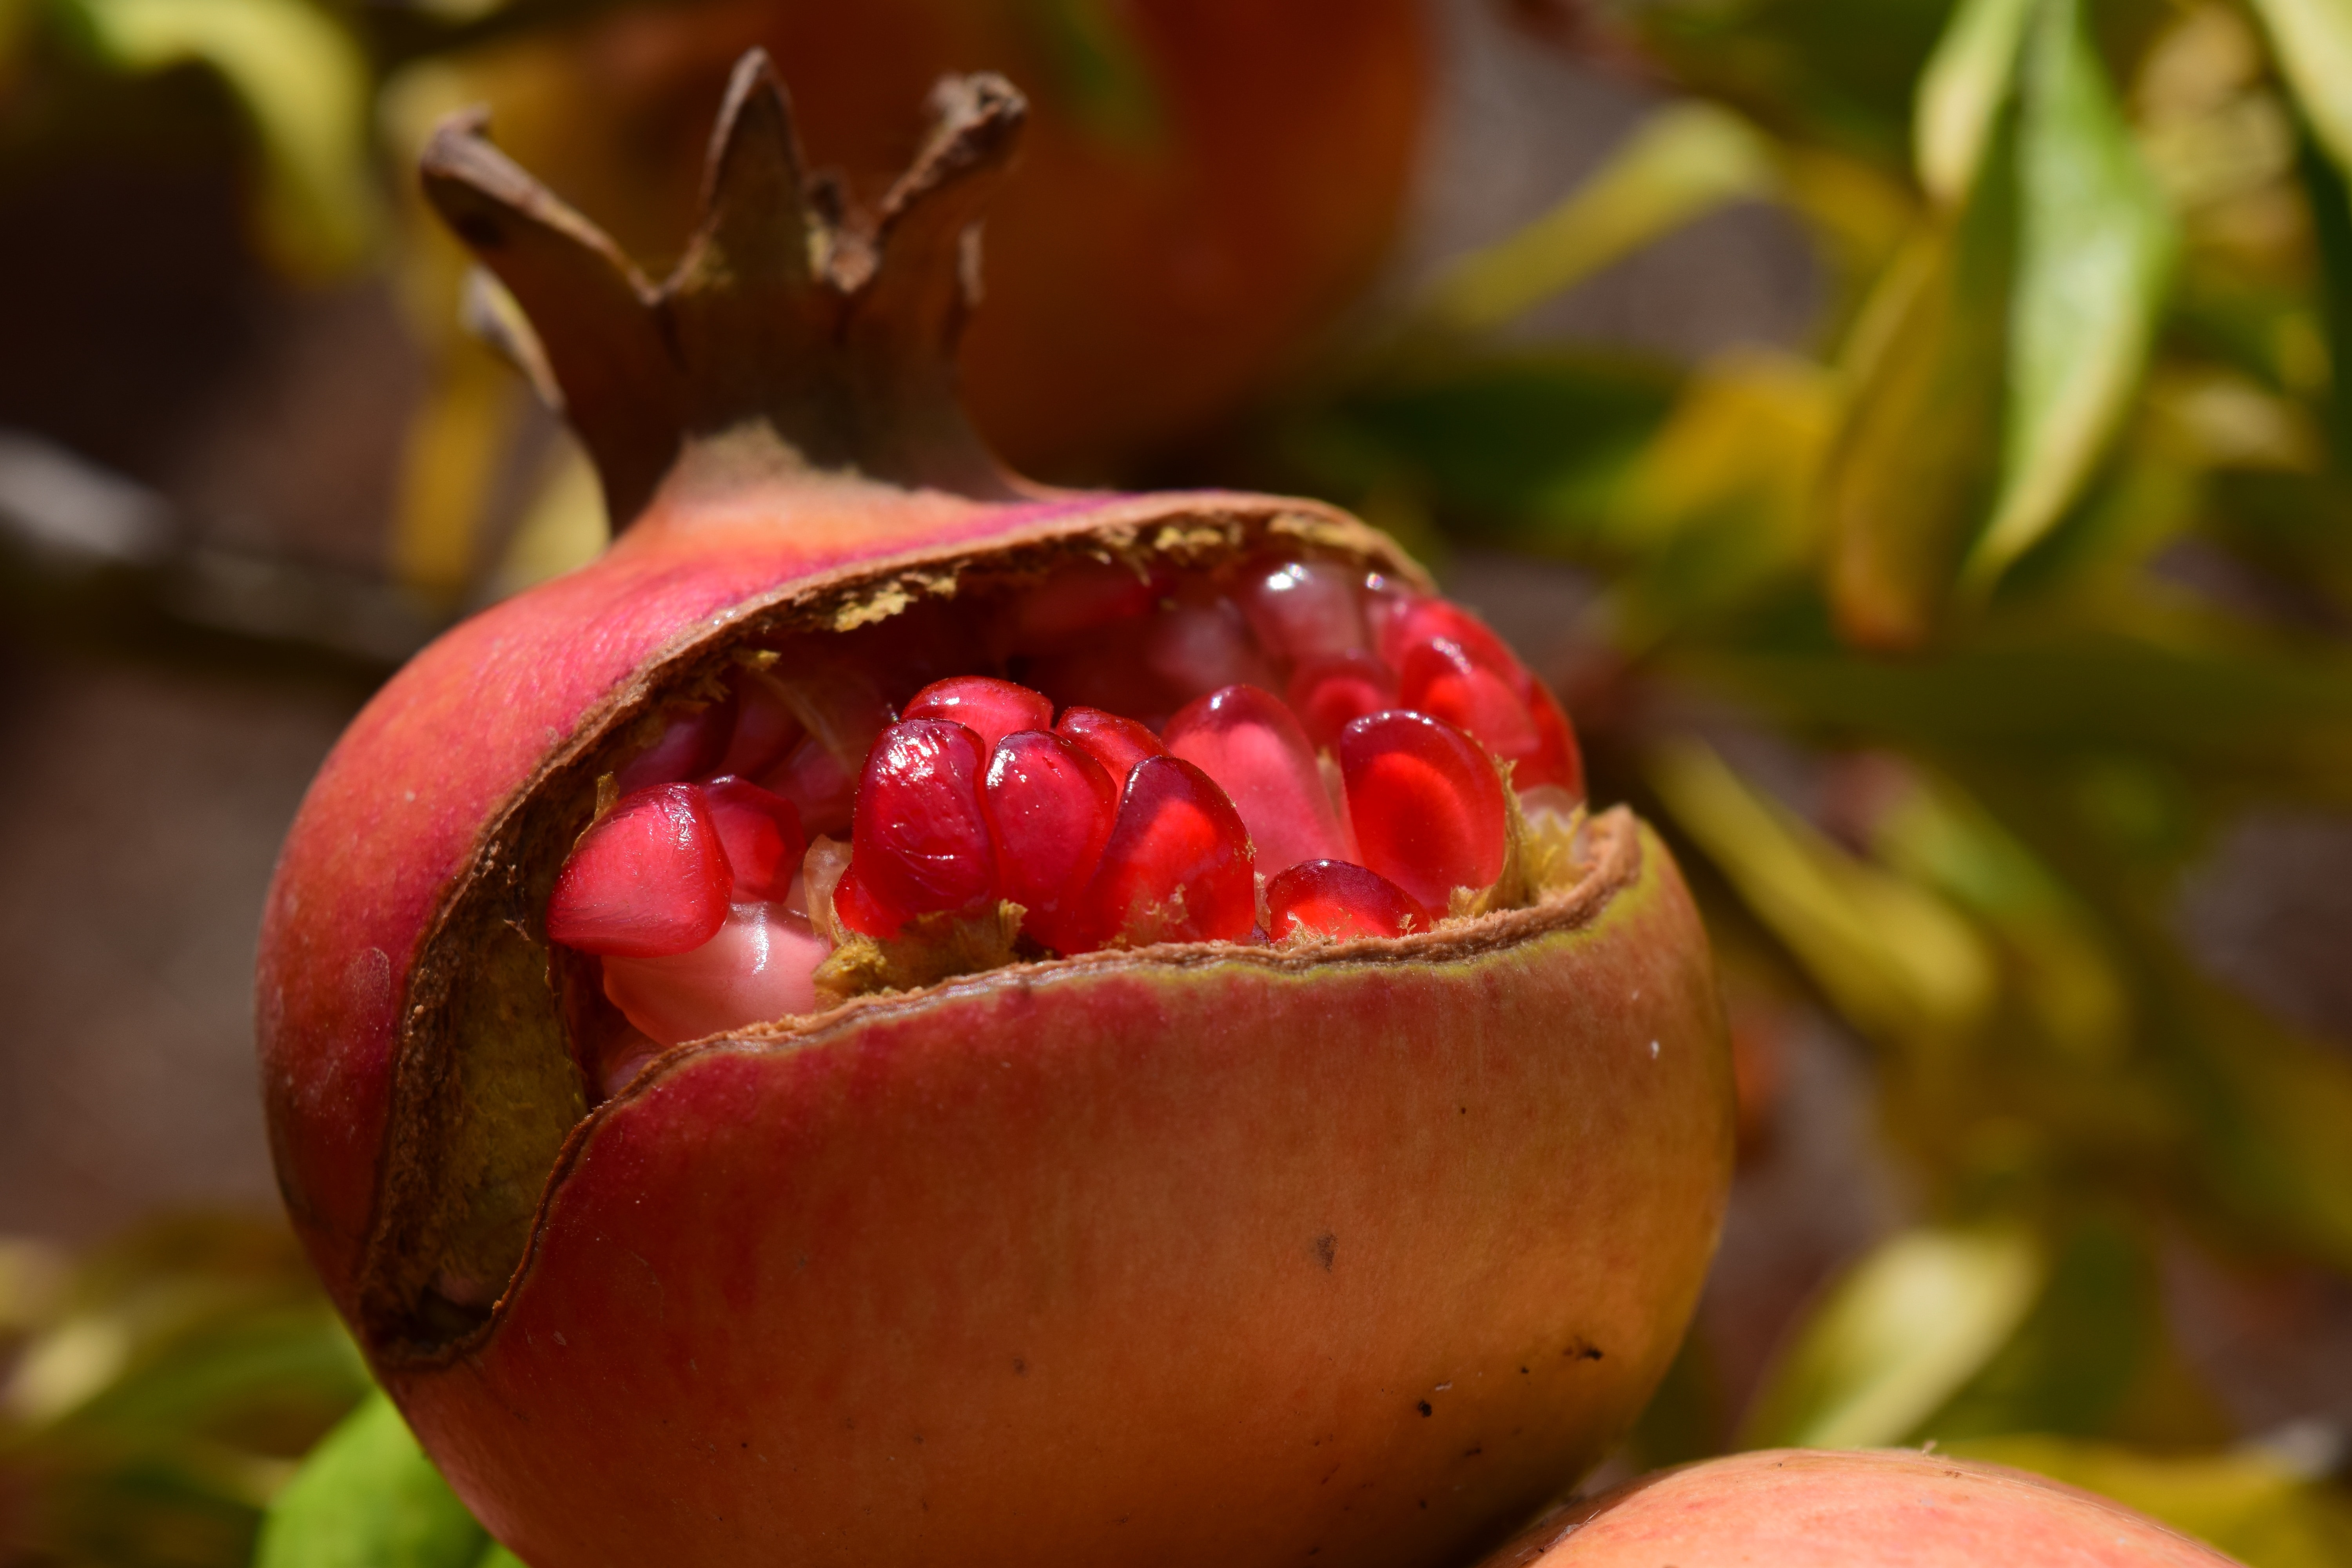 pink and brown round fruit